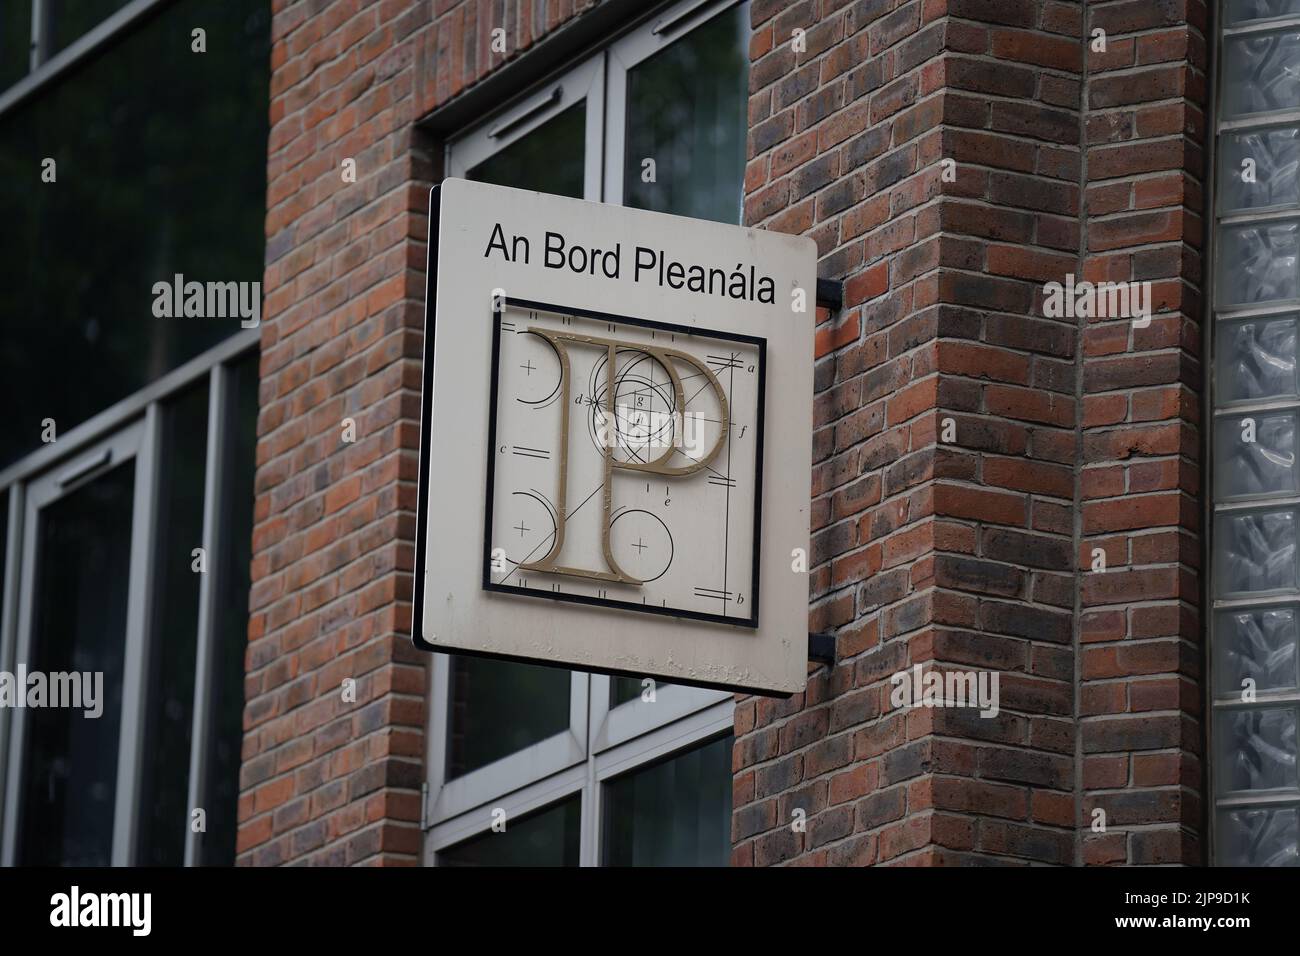 The offices of An Bord Pleanala in Dublin. Ireland's Minister for Housing, Local Government and Heritage Darragh O'Brien has said appointments to the planning appeals body will be "effectively" halted after he referred the findings of an independent report to Gardai and the Director of Public Prosecutions (DPP). Picture date: Tuesday August 16, 2022. Stock Photo